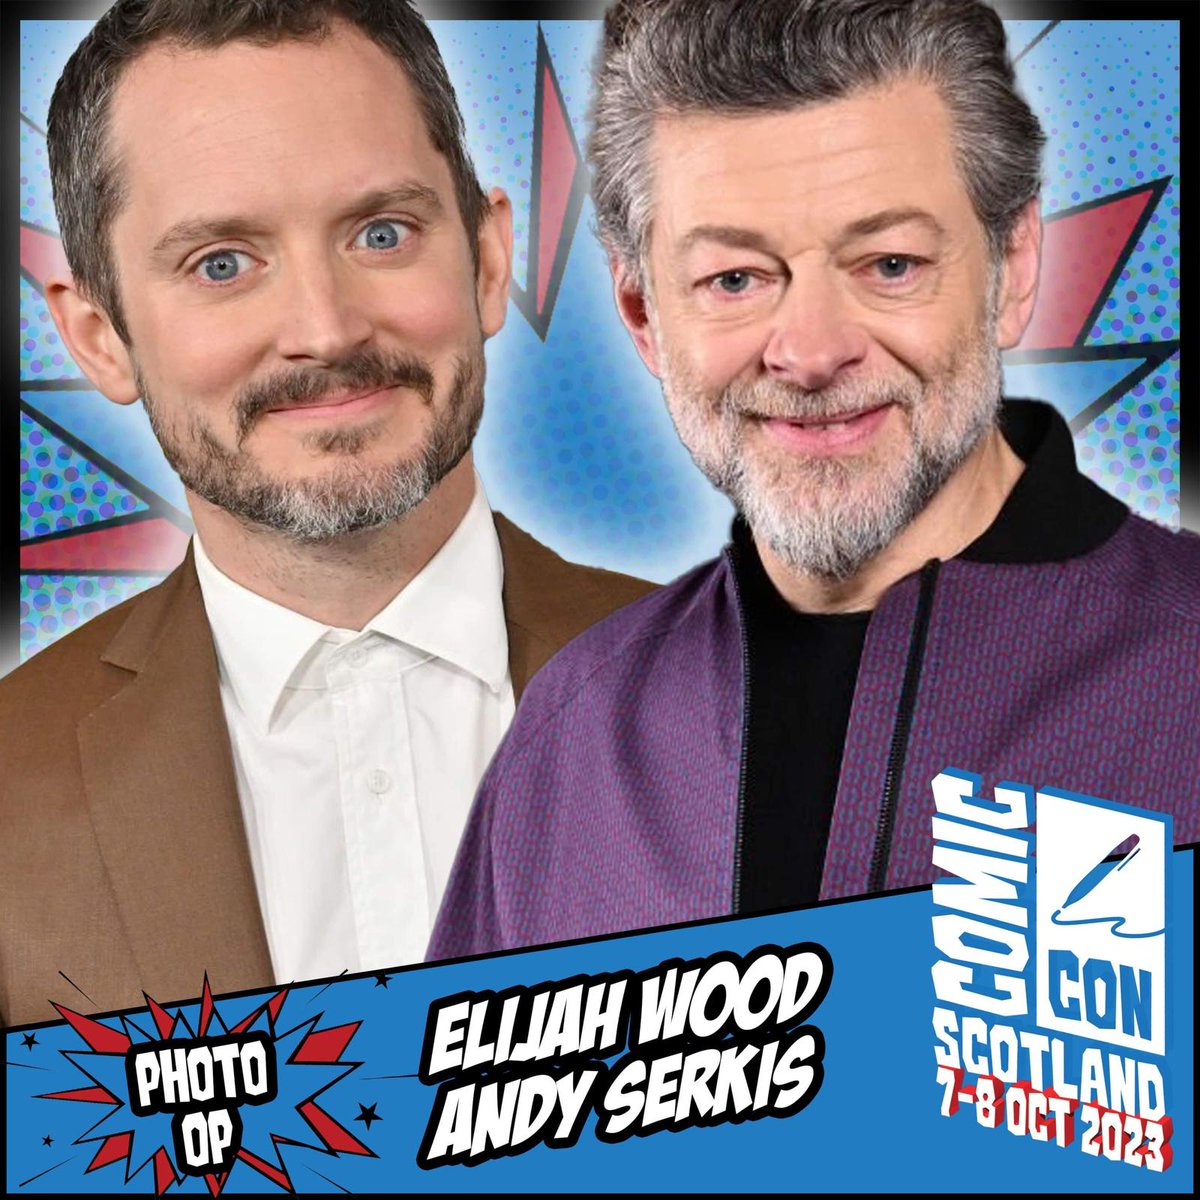 COMIC CON SCOTLAND PHOTO ANNOUNCEMENT - ANDY SERKIS & ELIJAH WOOD

To get tickets for this (UK first!) photo opportunity please go to comicconventionscotland.co.uk

#AndySerkis #ElijahWood #ComicCon #ComicCon23 #ComicCon2023 #ComicConScotland #Scotland